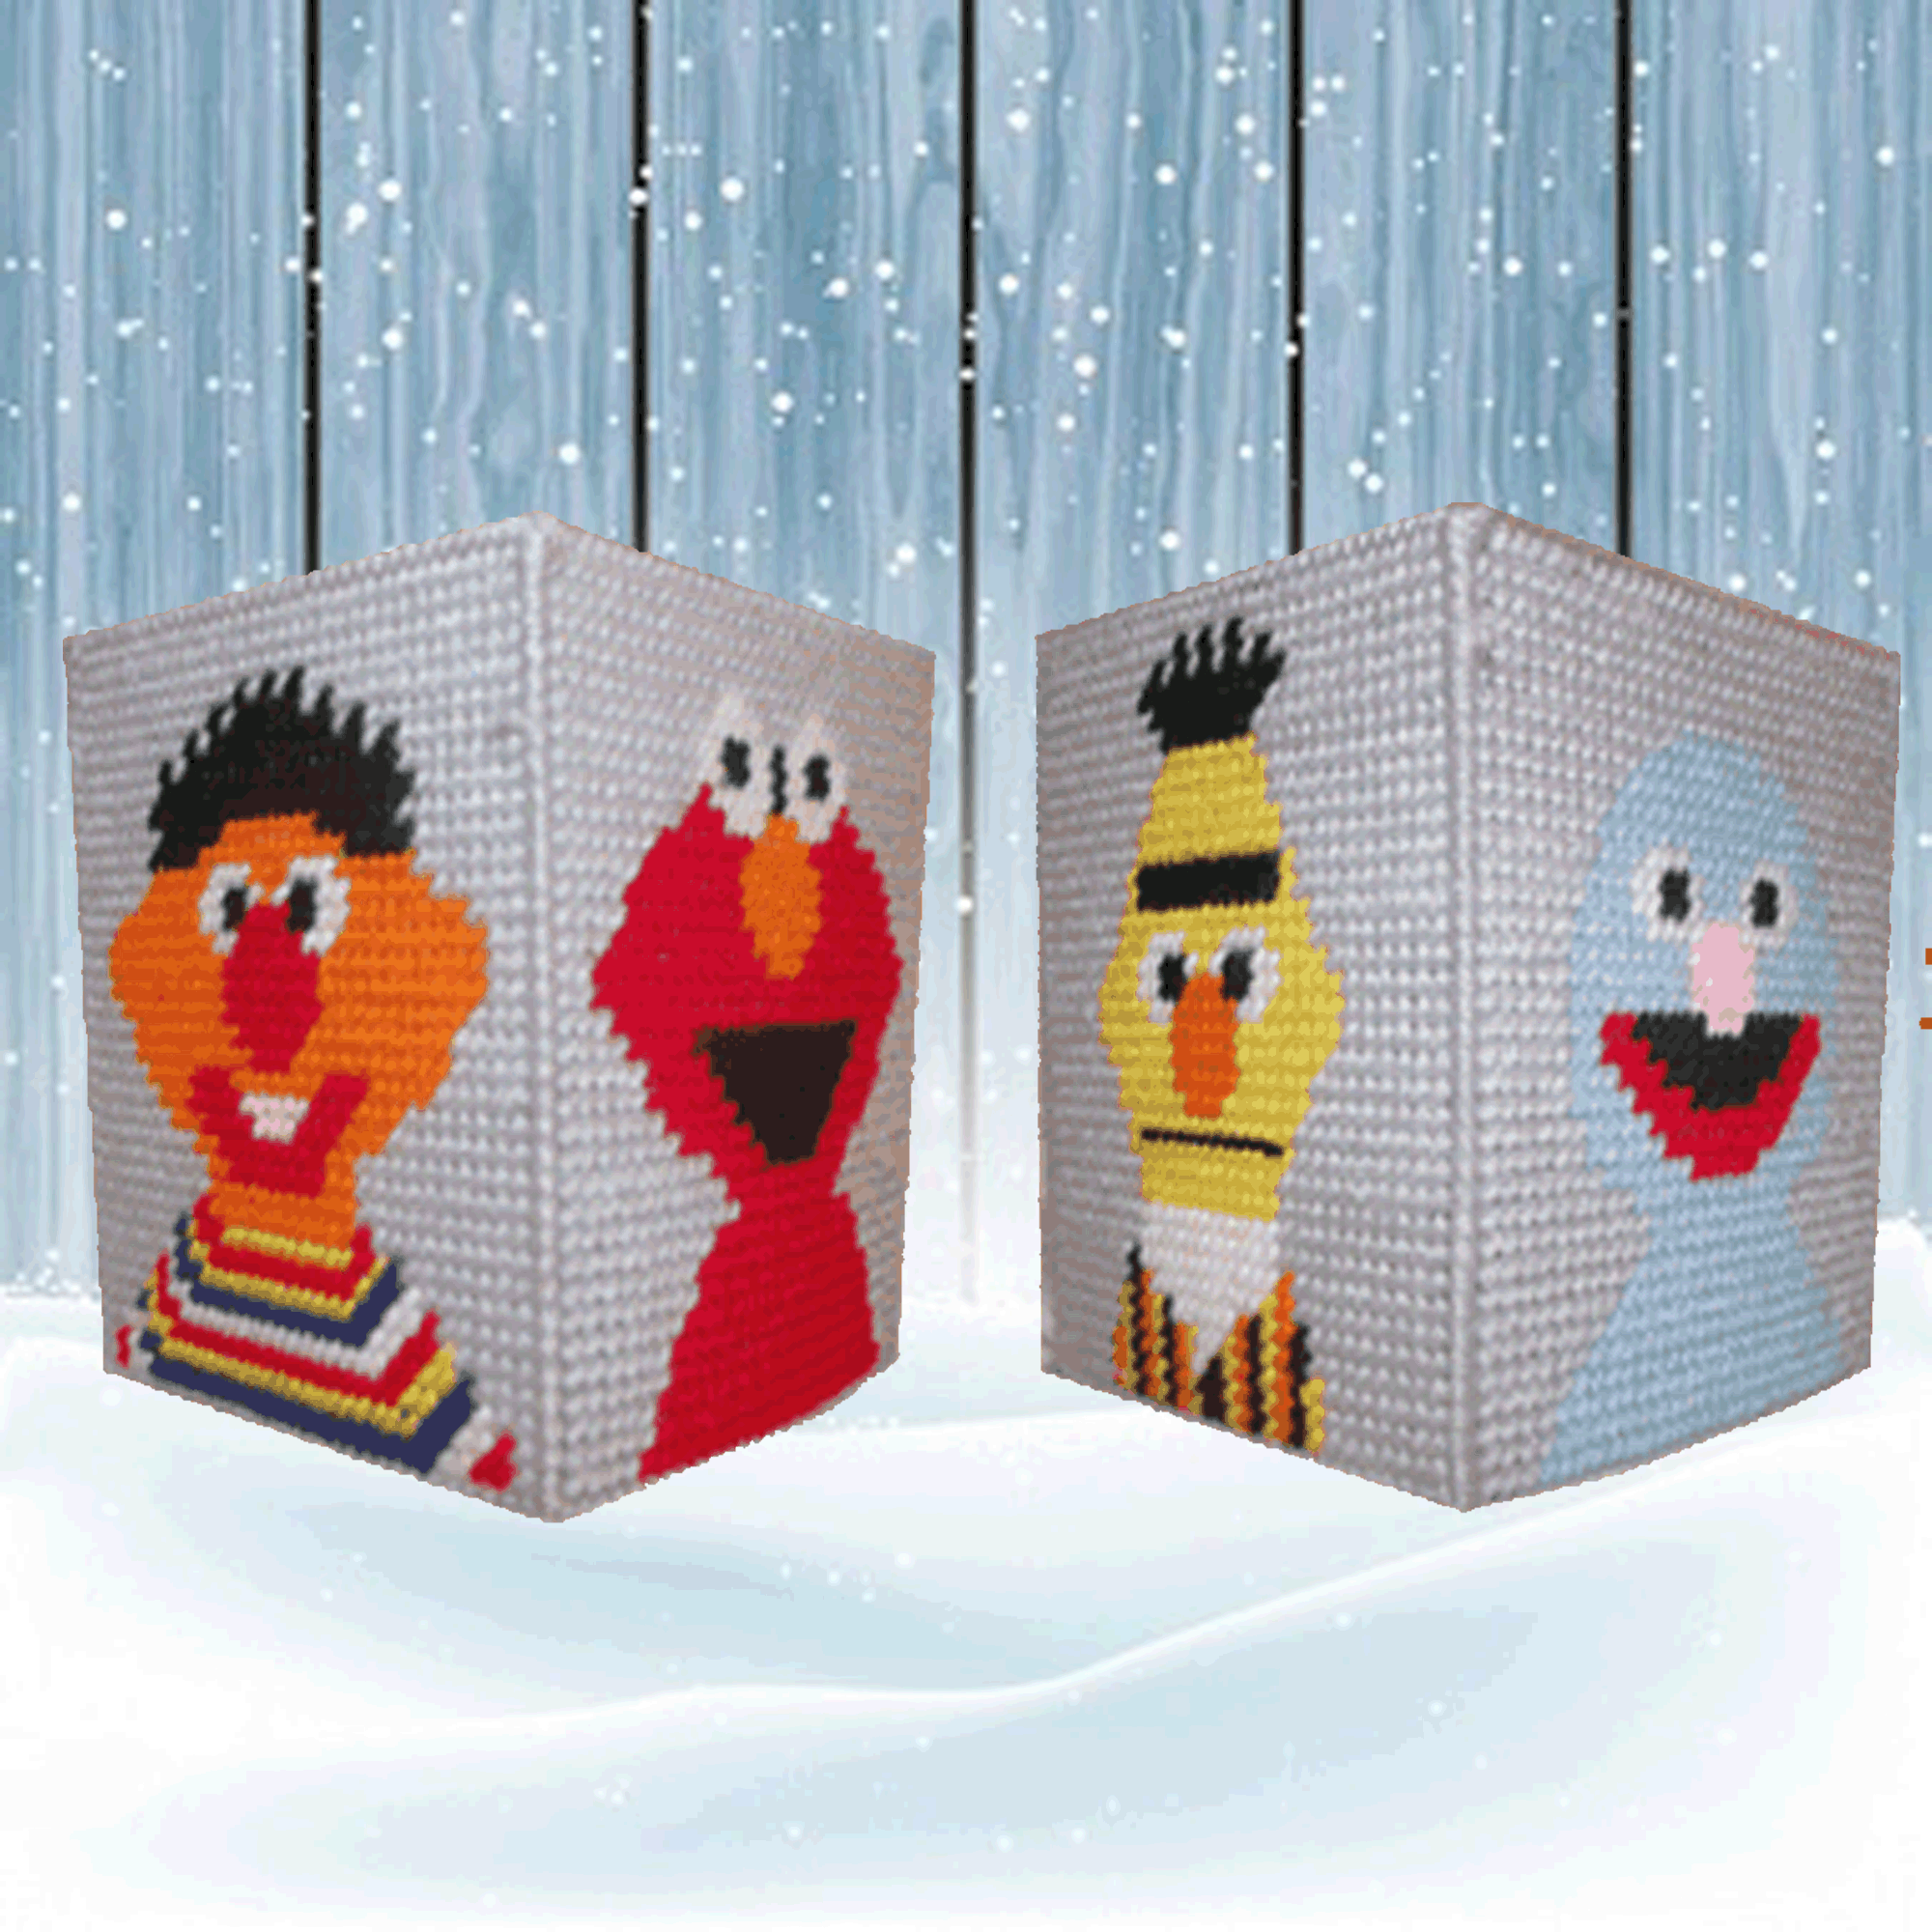 Sesame Bert and Grover sides 1 and 2